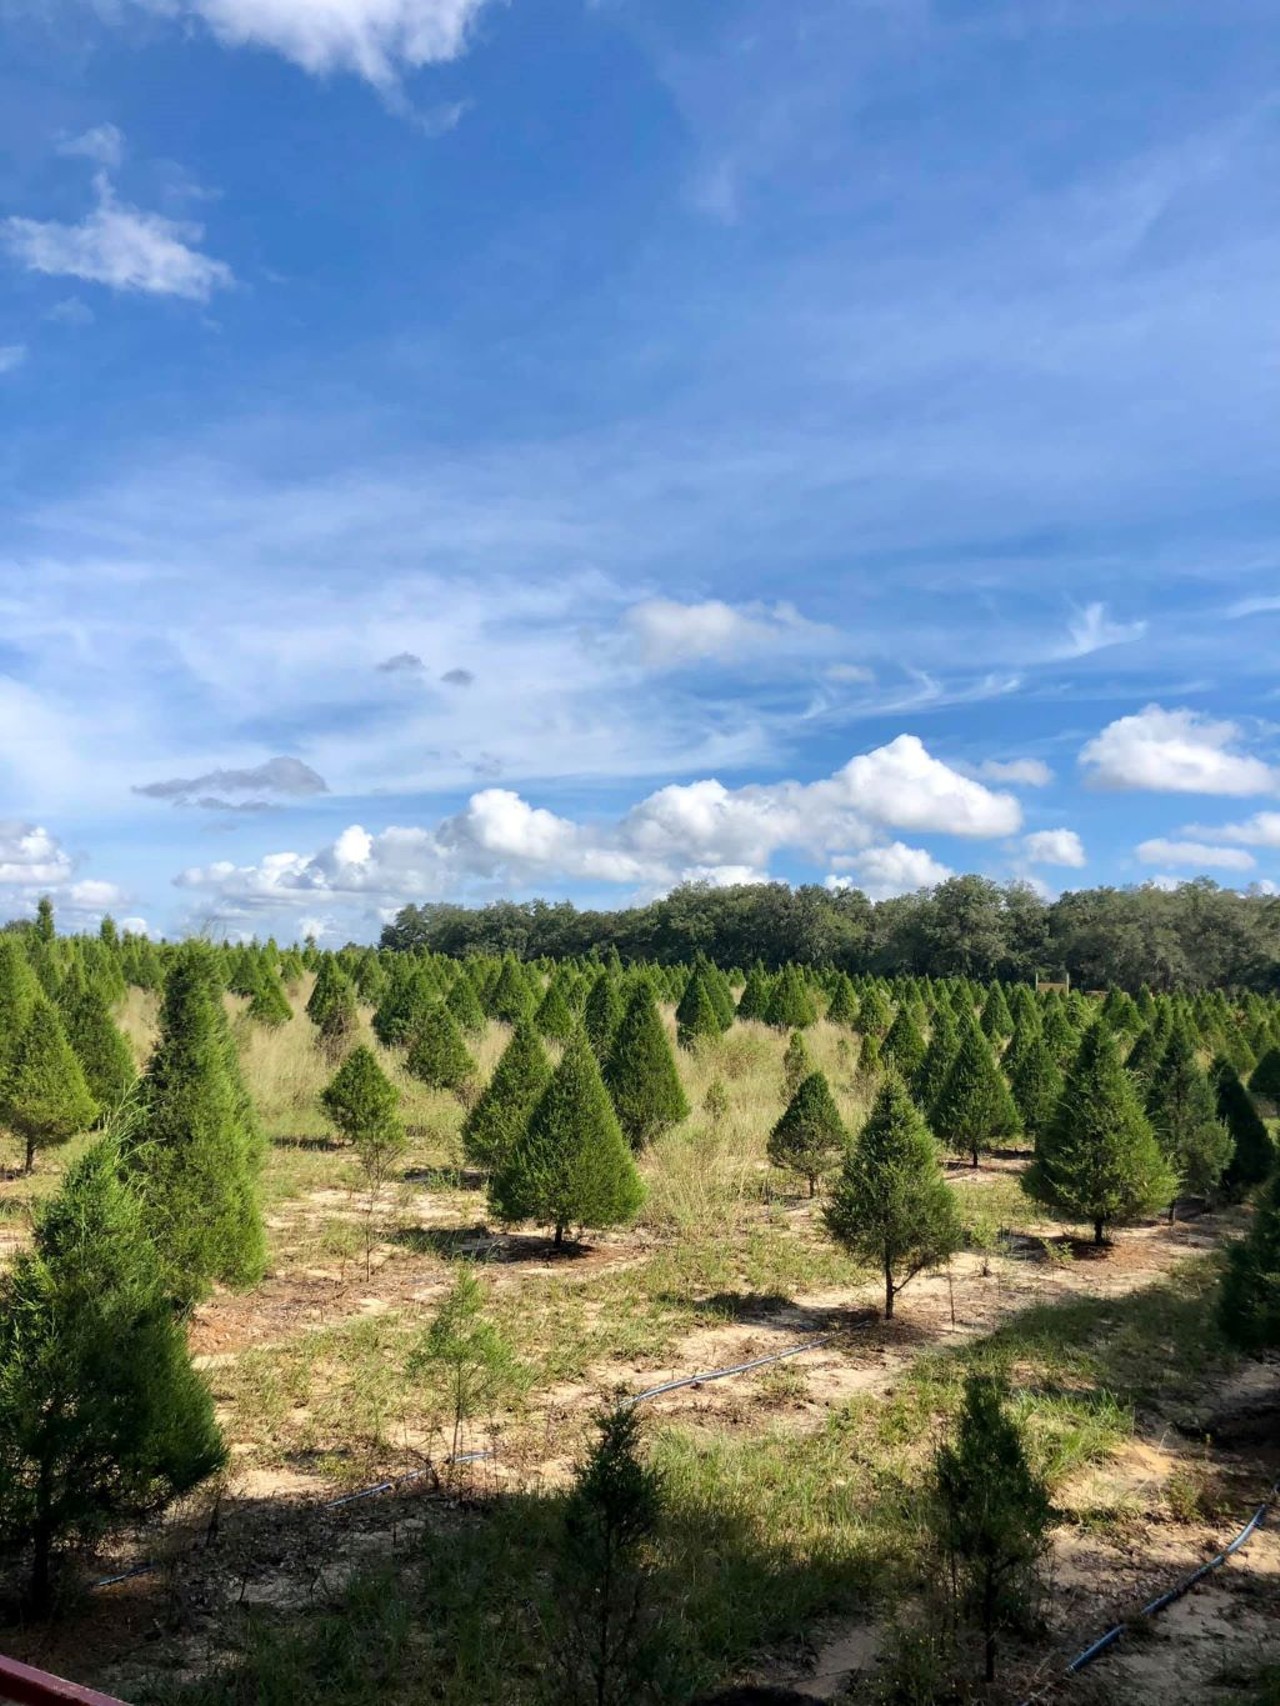 Santa&#146;s Christmas Tree Forest 
352-357-9863, 35317 Huff Road, Eustis
Take your pick of pre-cut trees and U-cut Florida trees that come in all sizes. Admission tickets are required for all guests visiting the farm. Make sure to get your tickets early online. 
Photo via Santa&#146;s Christmas Tree Forest/Facebook